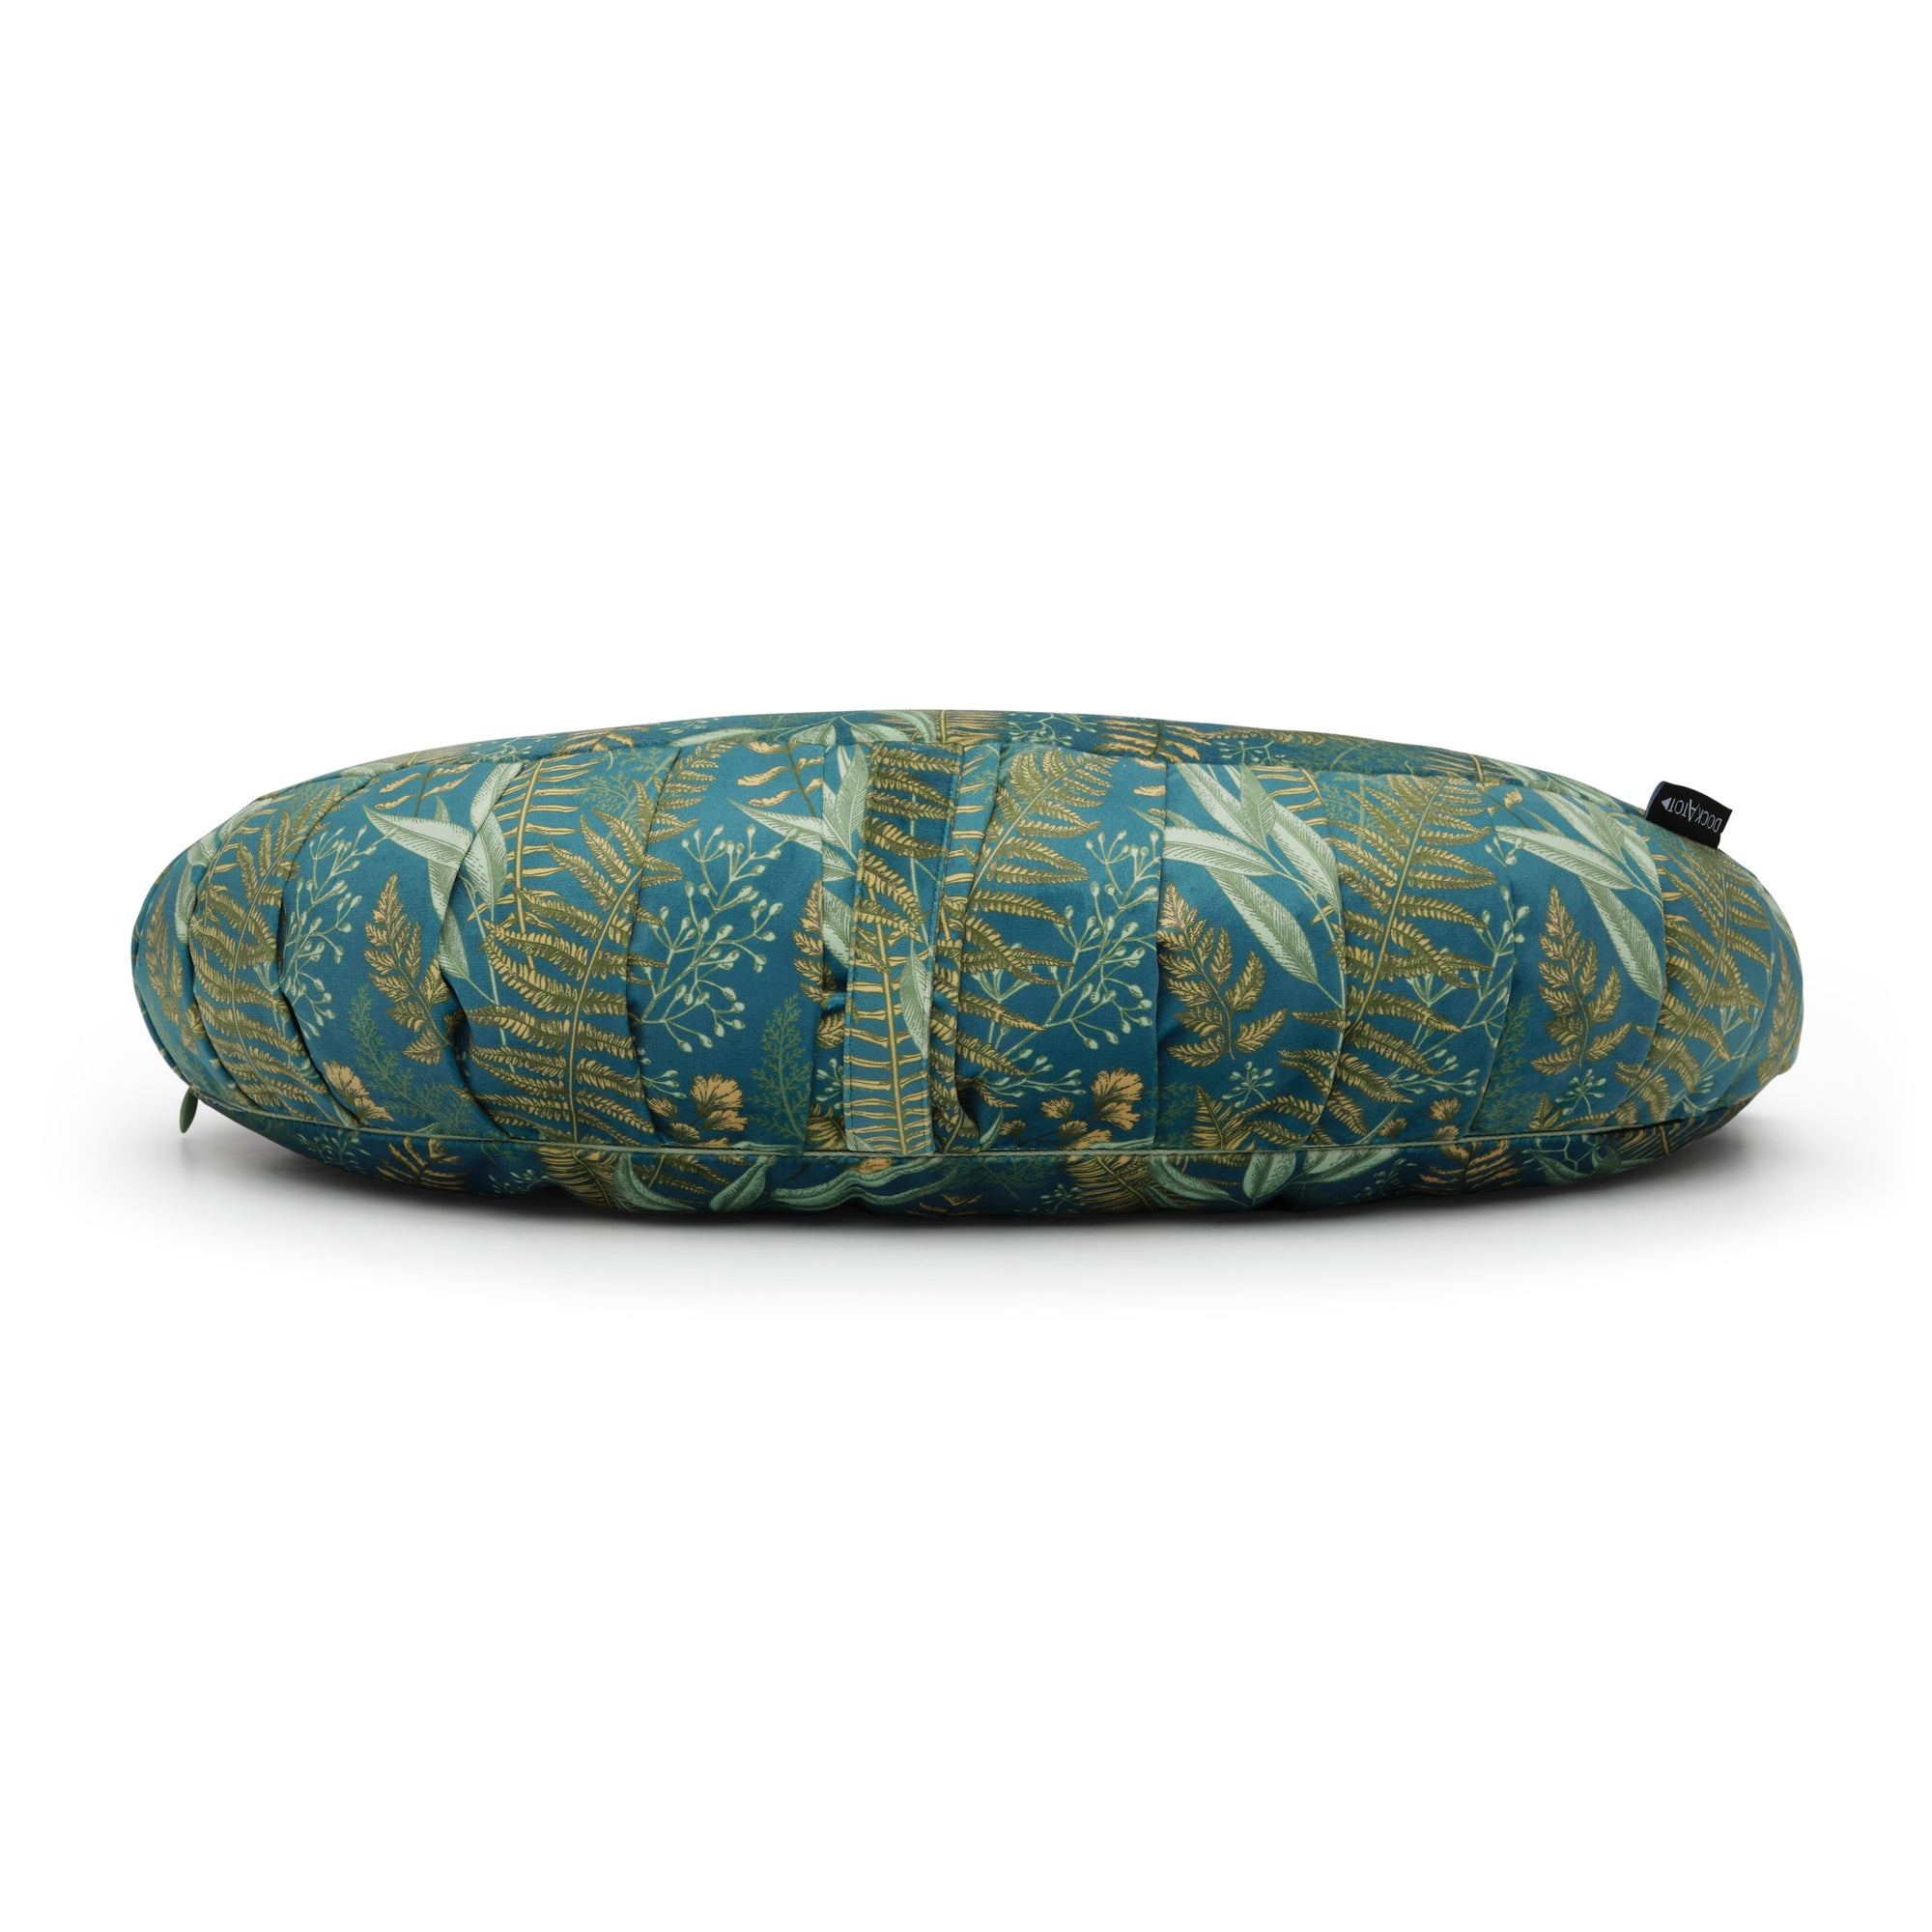 A LAST CHANCE: La Maman Wedge - Navy Night Falls featuring a tropical leaf pattern with various shades of green, blue, and yellow on a white background. The pillow has a small black tag on one side, offers lumbar support.